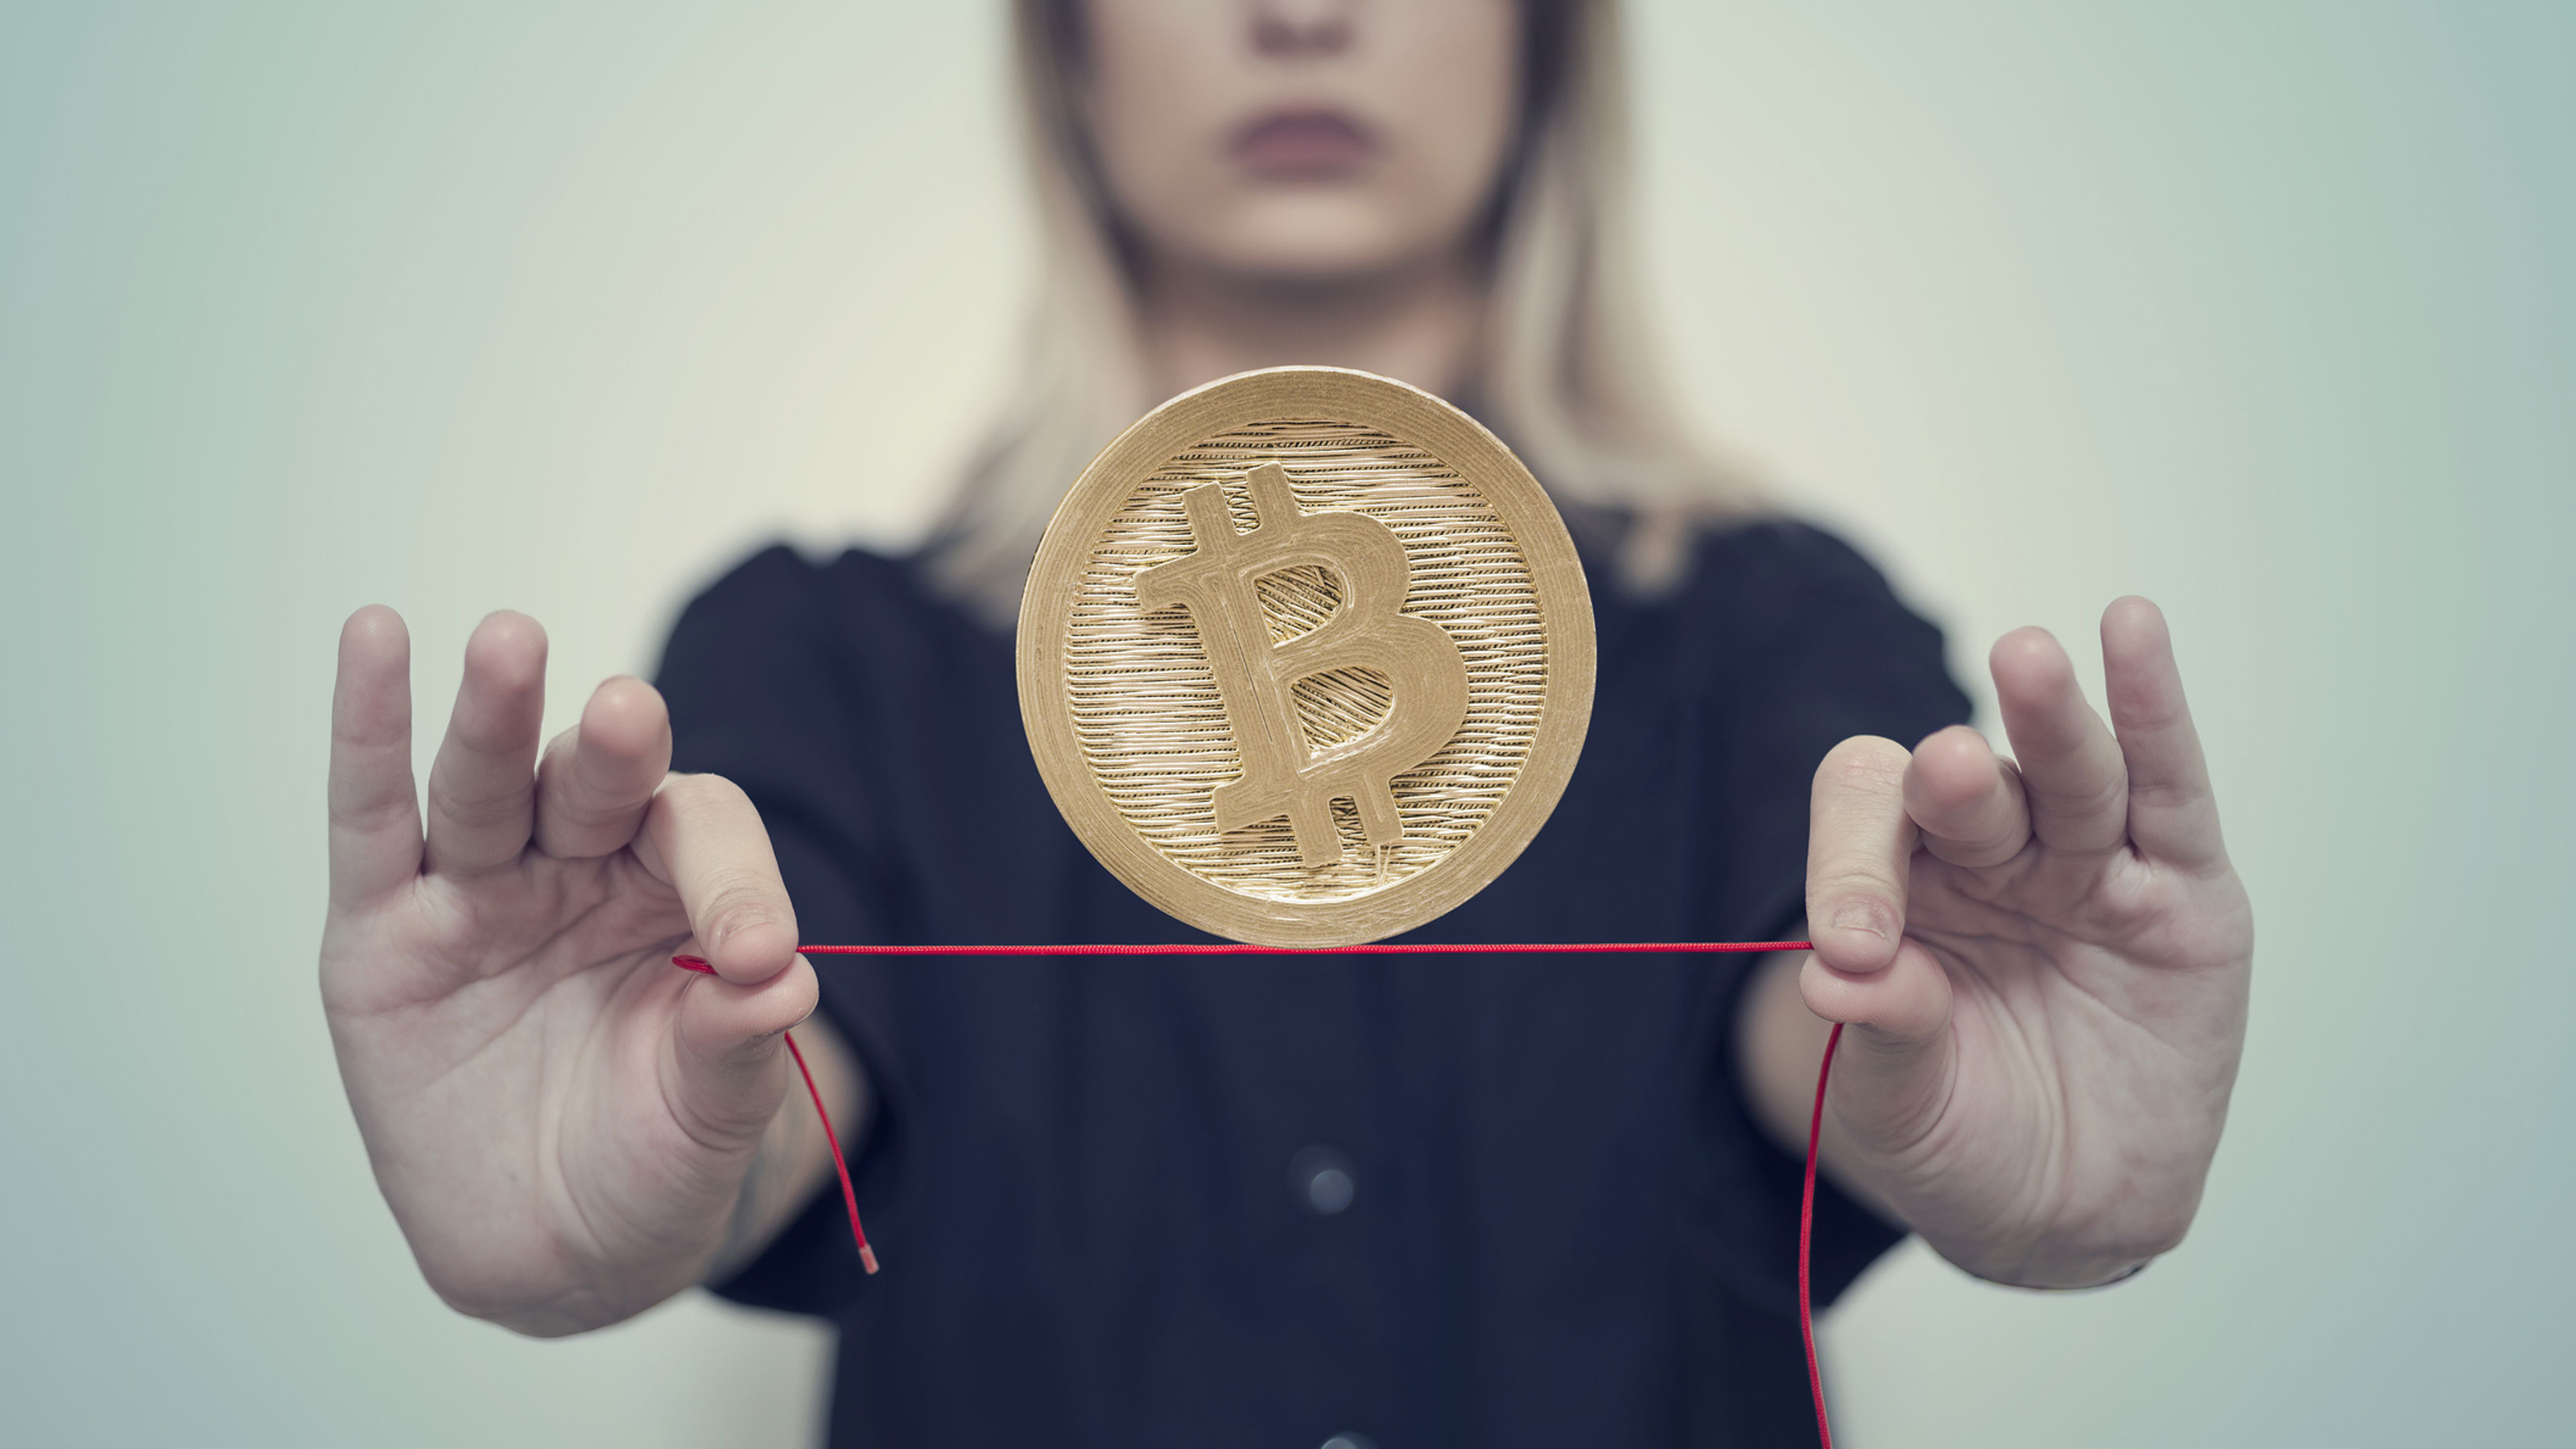 Bitcoin for Beginners: What You Need to Know about BTC - NerdWallet